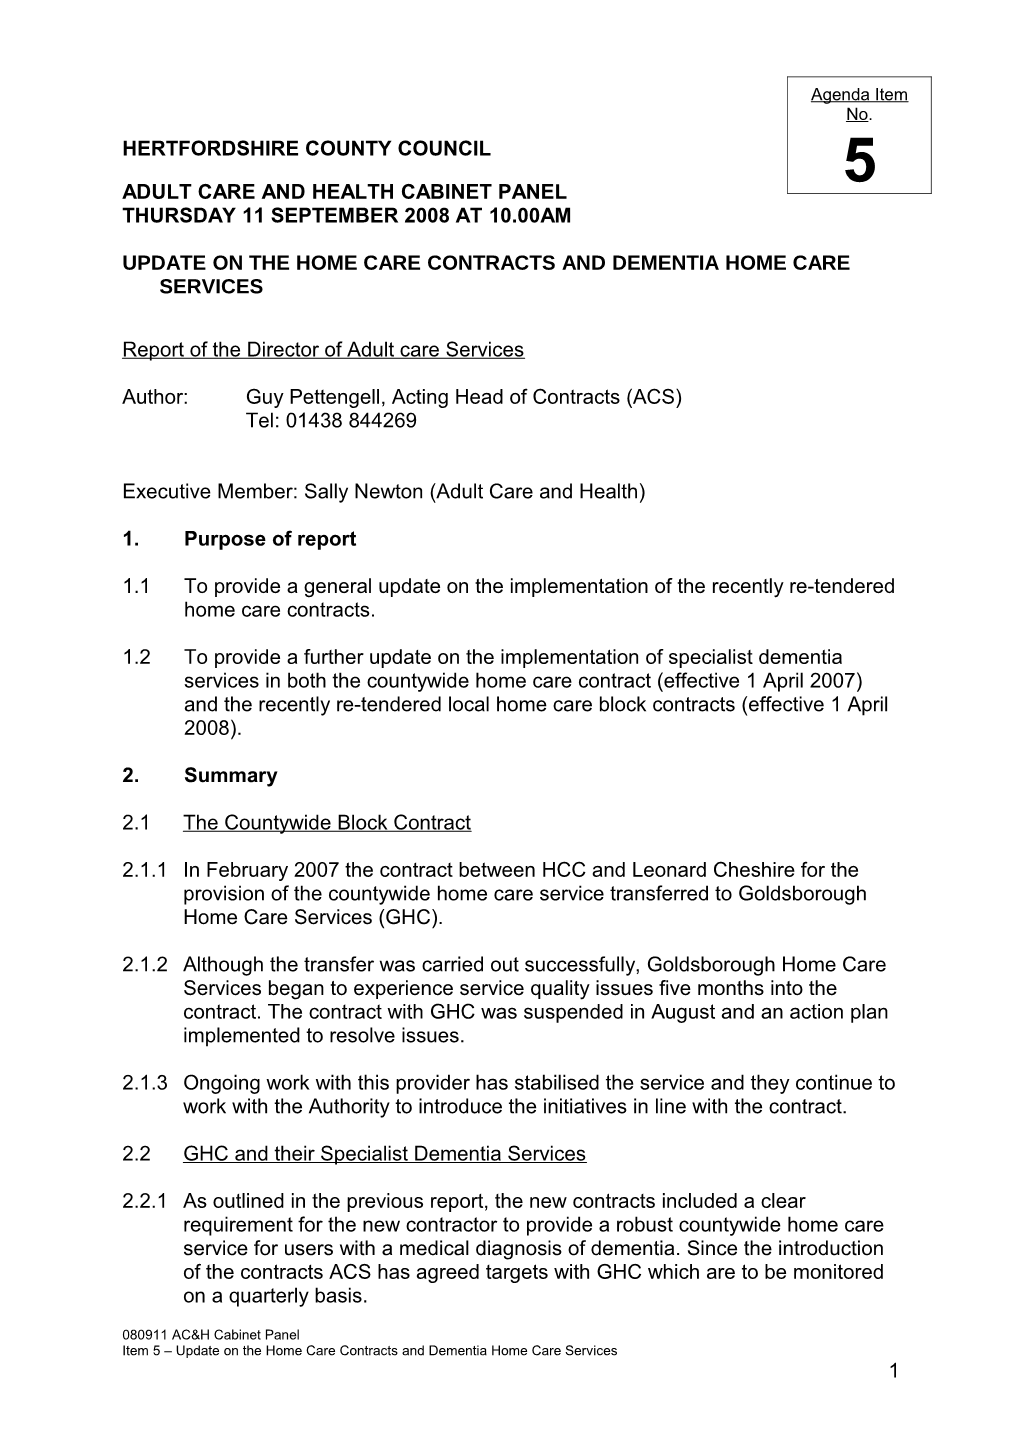 Adult Care and Health Cabinet Panel 11 September 2008 Item 5 Update on the Home Care Contracts